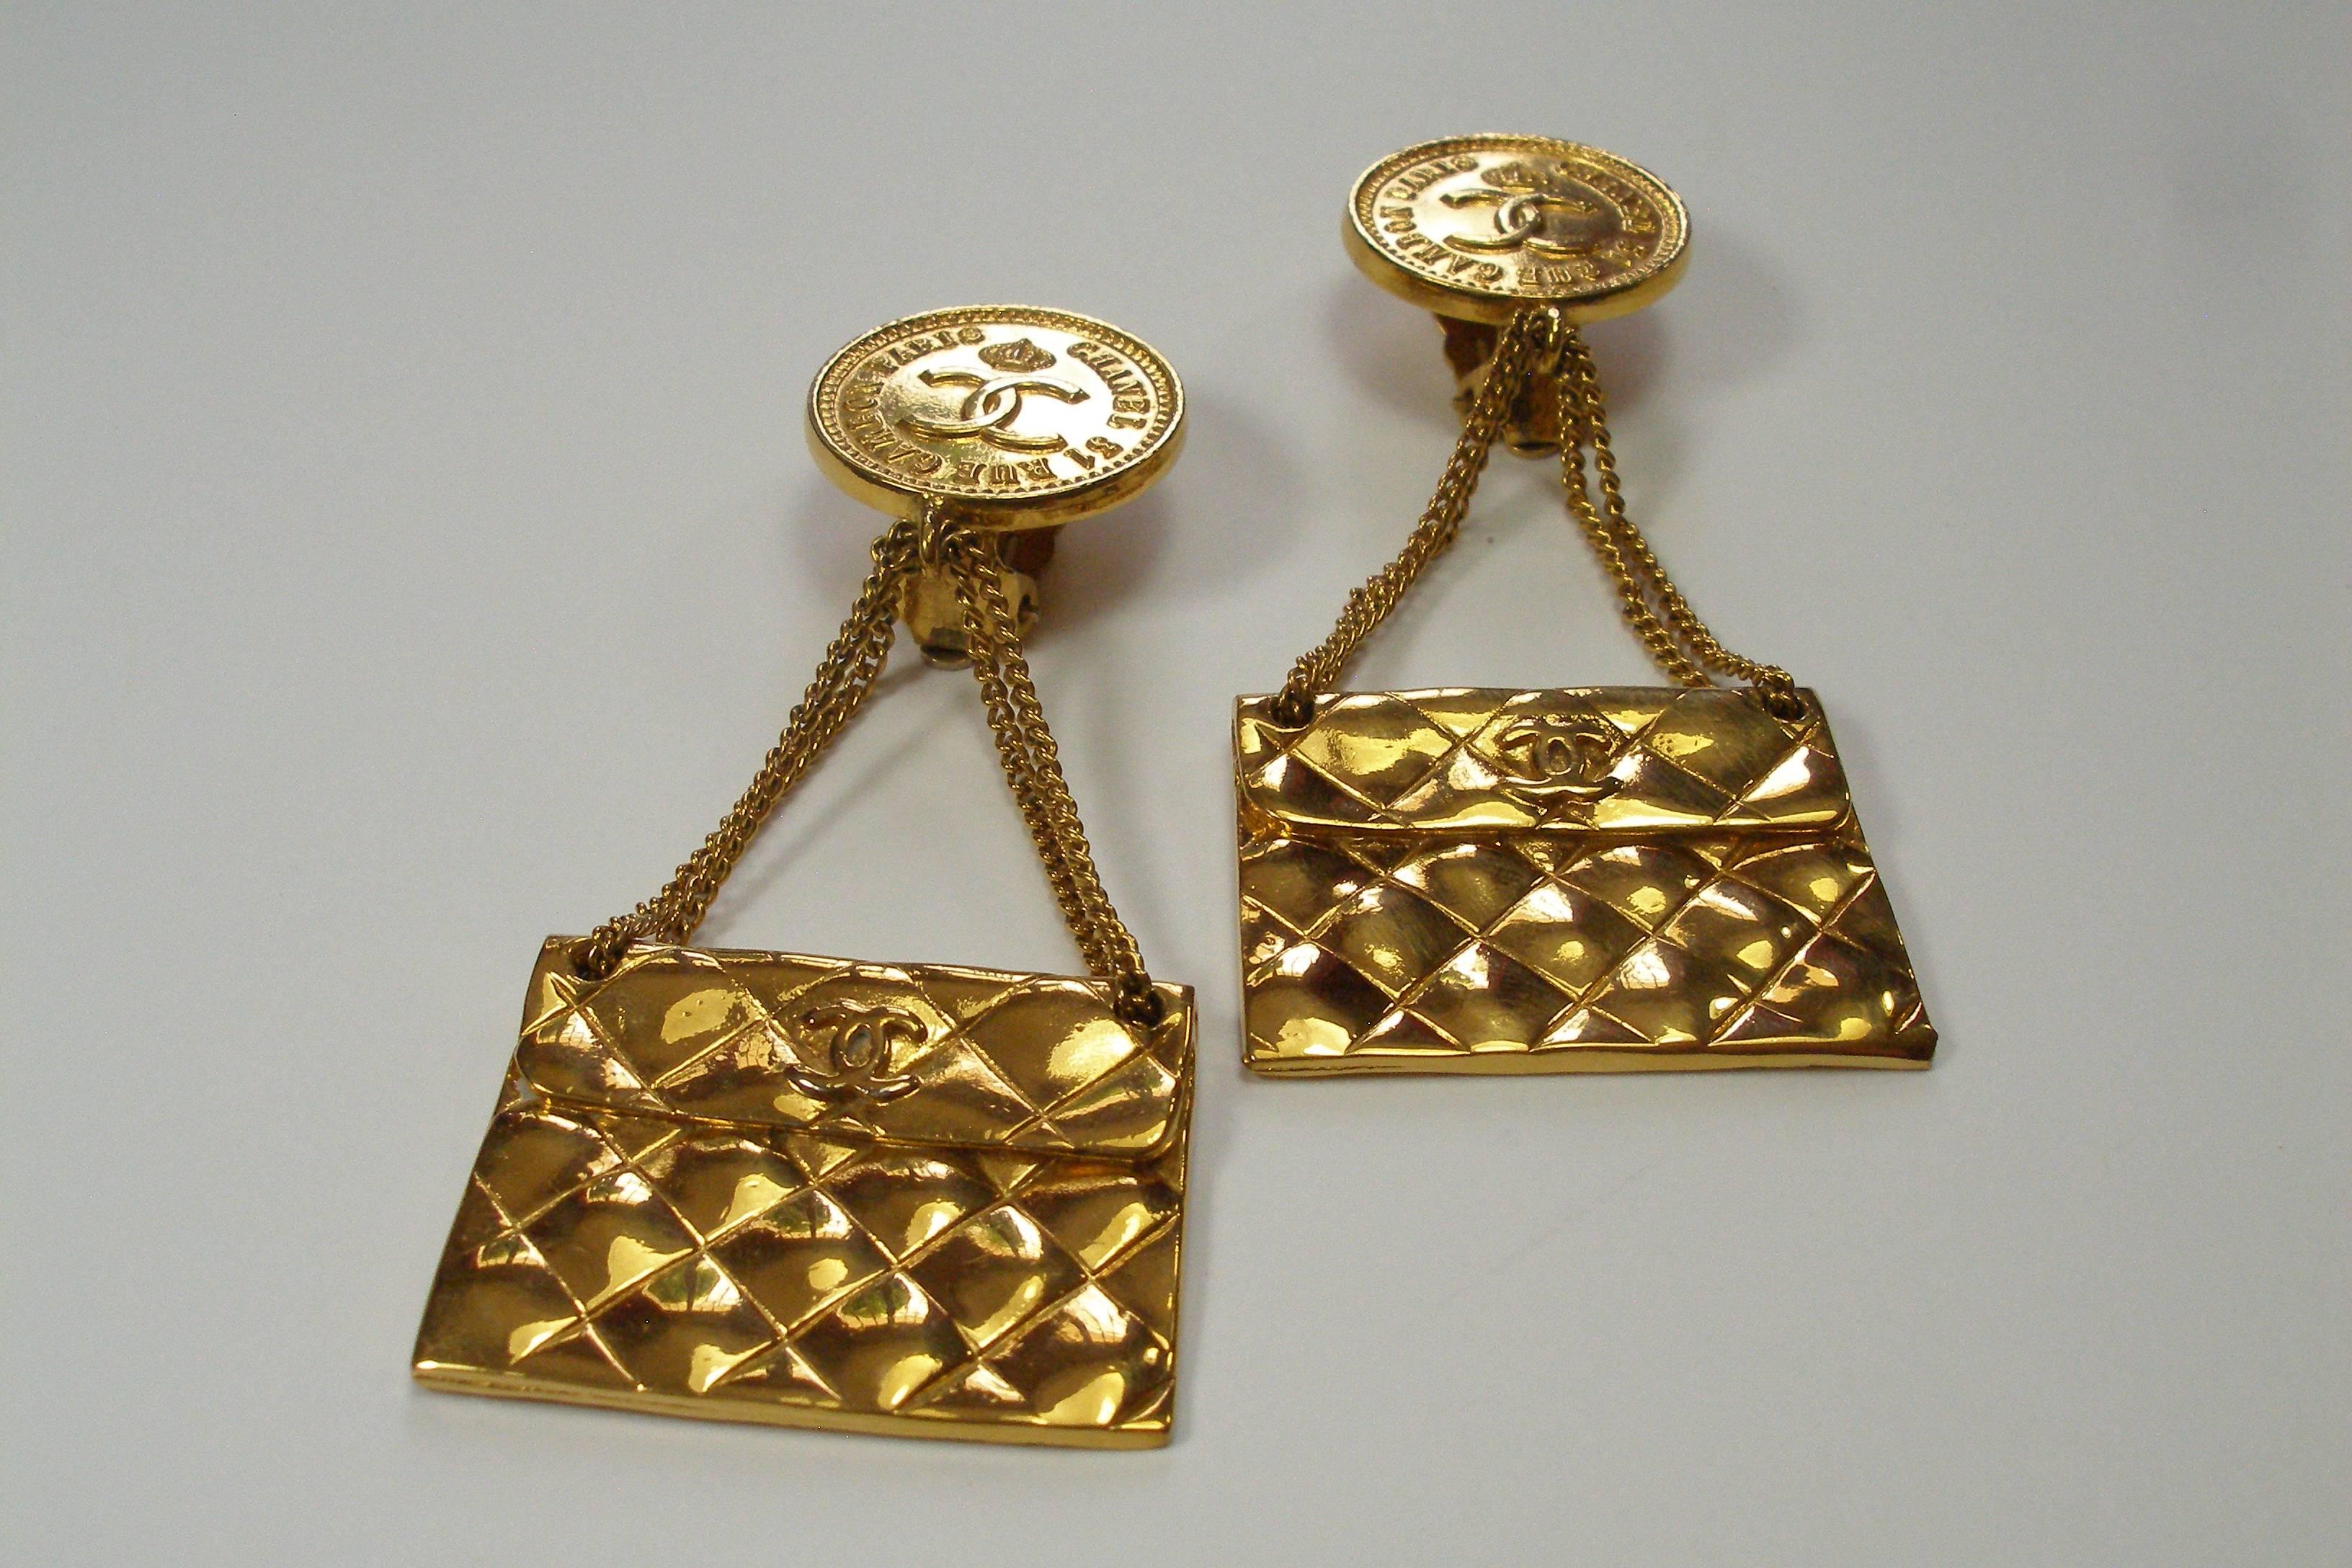  FANTASTIC CHANEL 1980/85 Iconic 2.55 Flap Bag Earrings / Good condition  In Fair Condition In VERGT, FR